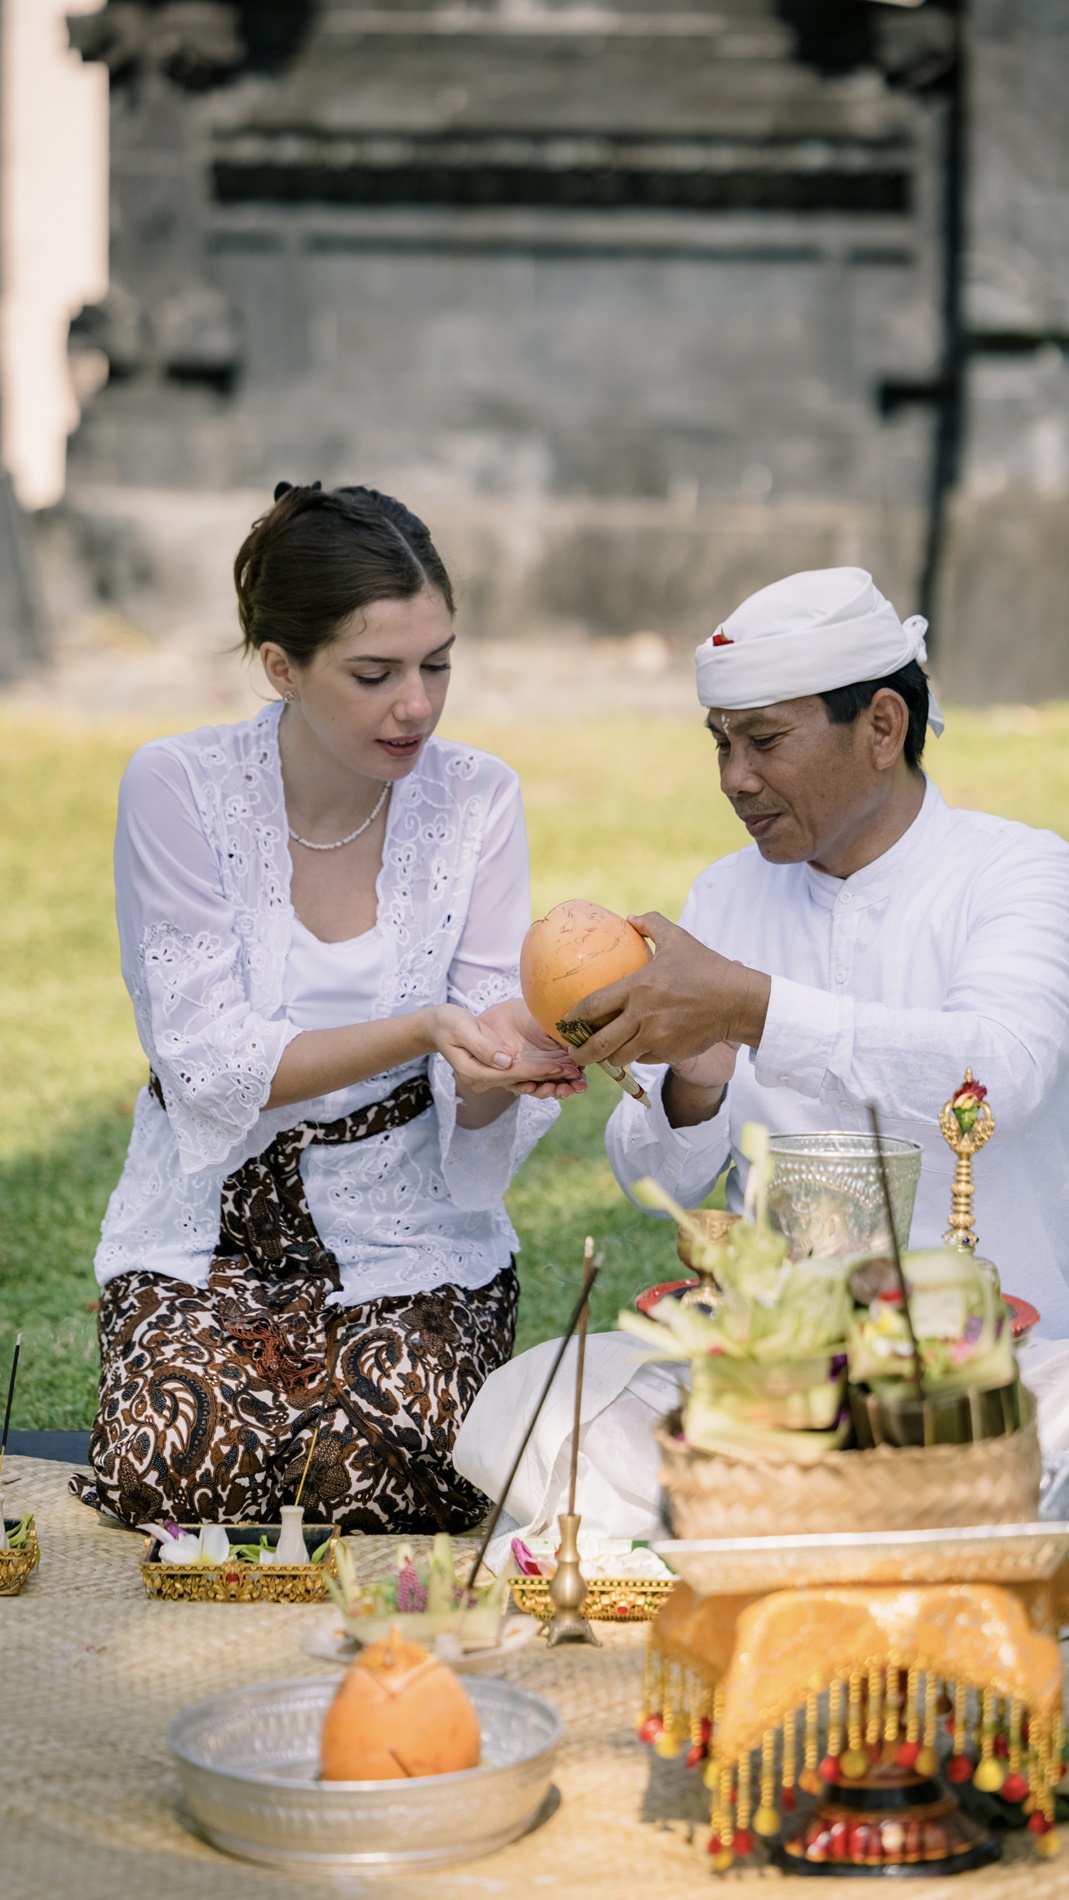 Melukat Ceremony; An Authentic Balinese Ritual to Start the Eat.Pray.Spa's Treatment